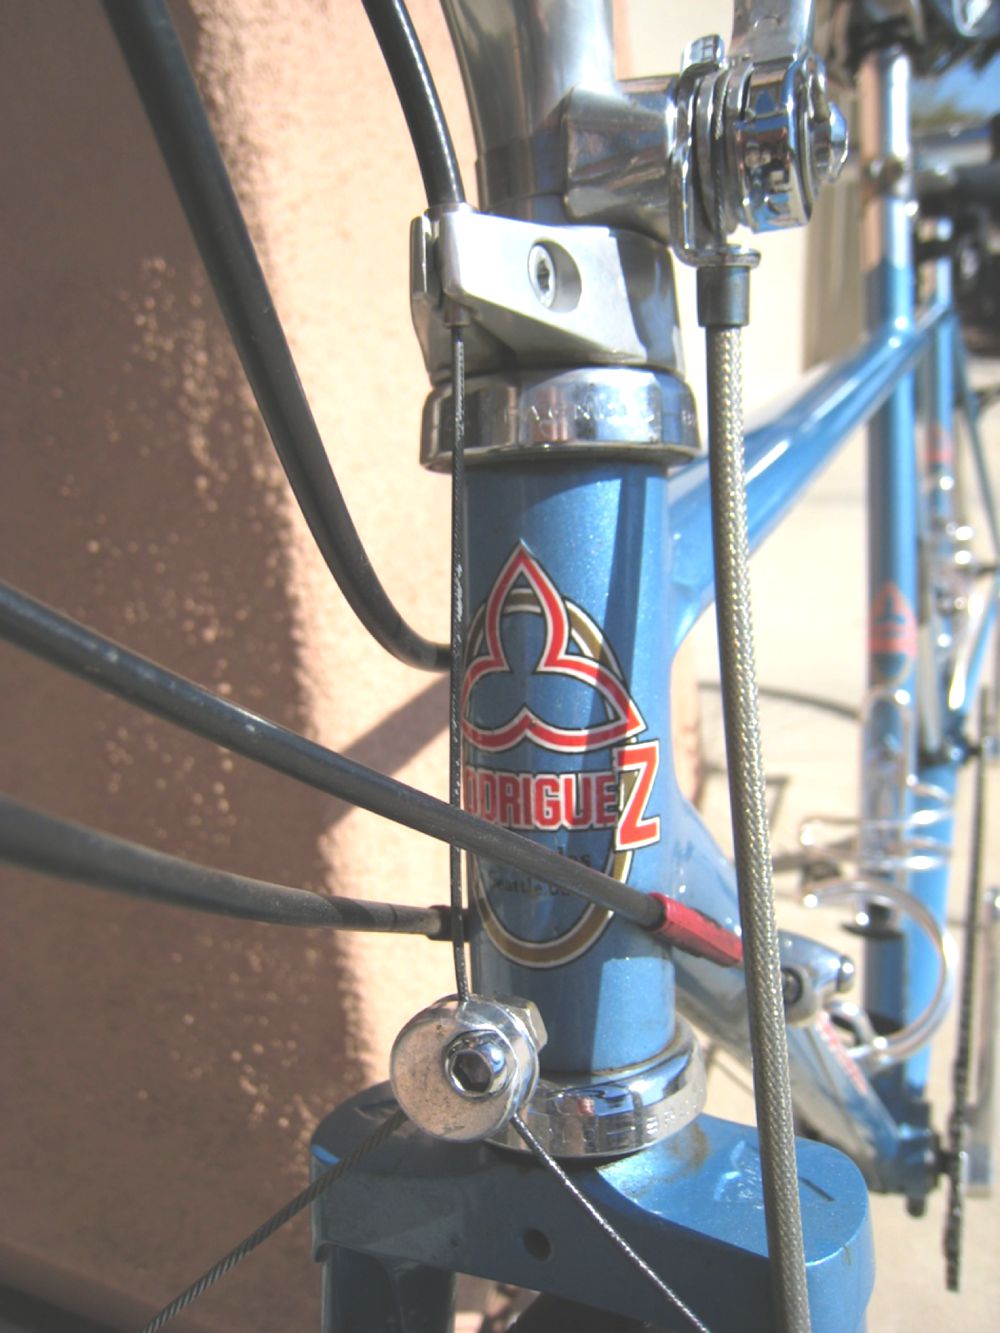 Brand New looking Rodriguez head tube decal